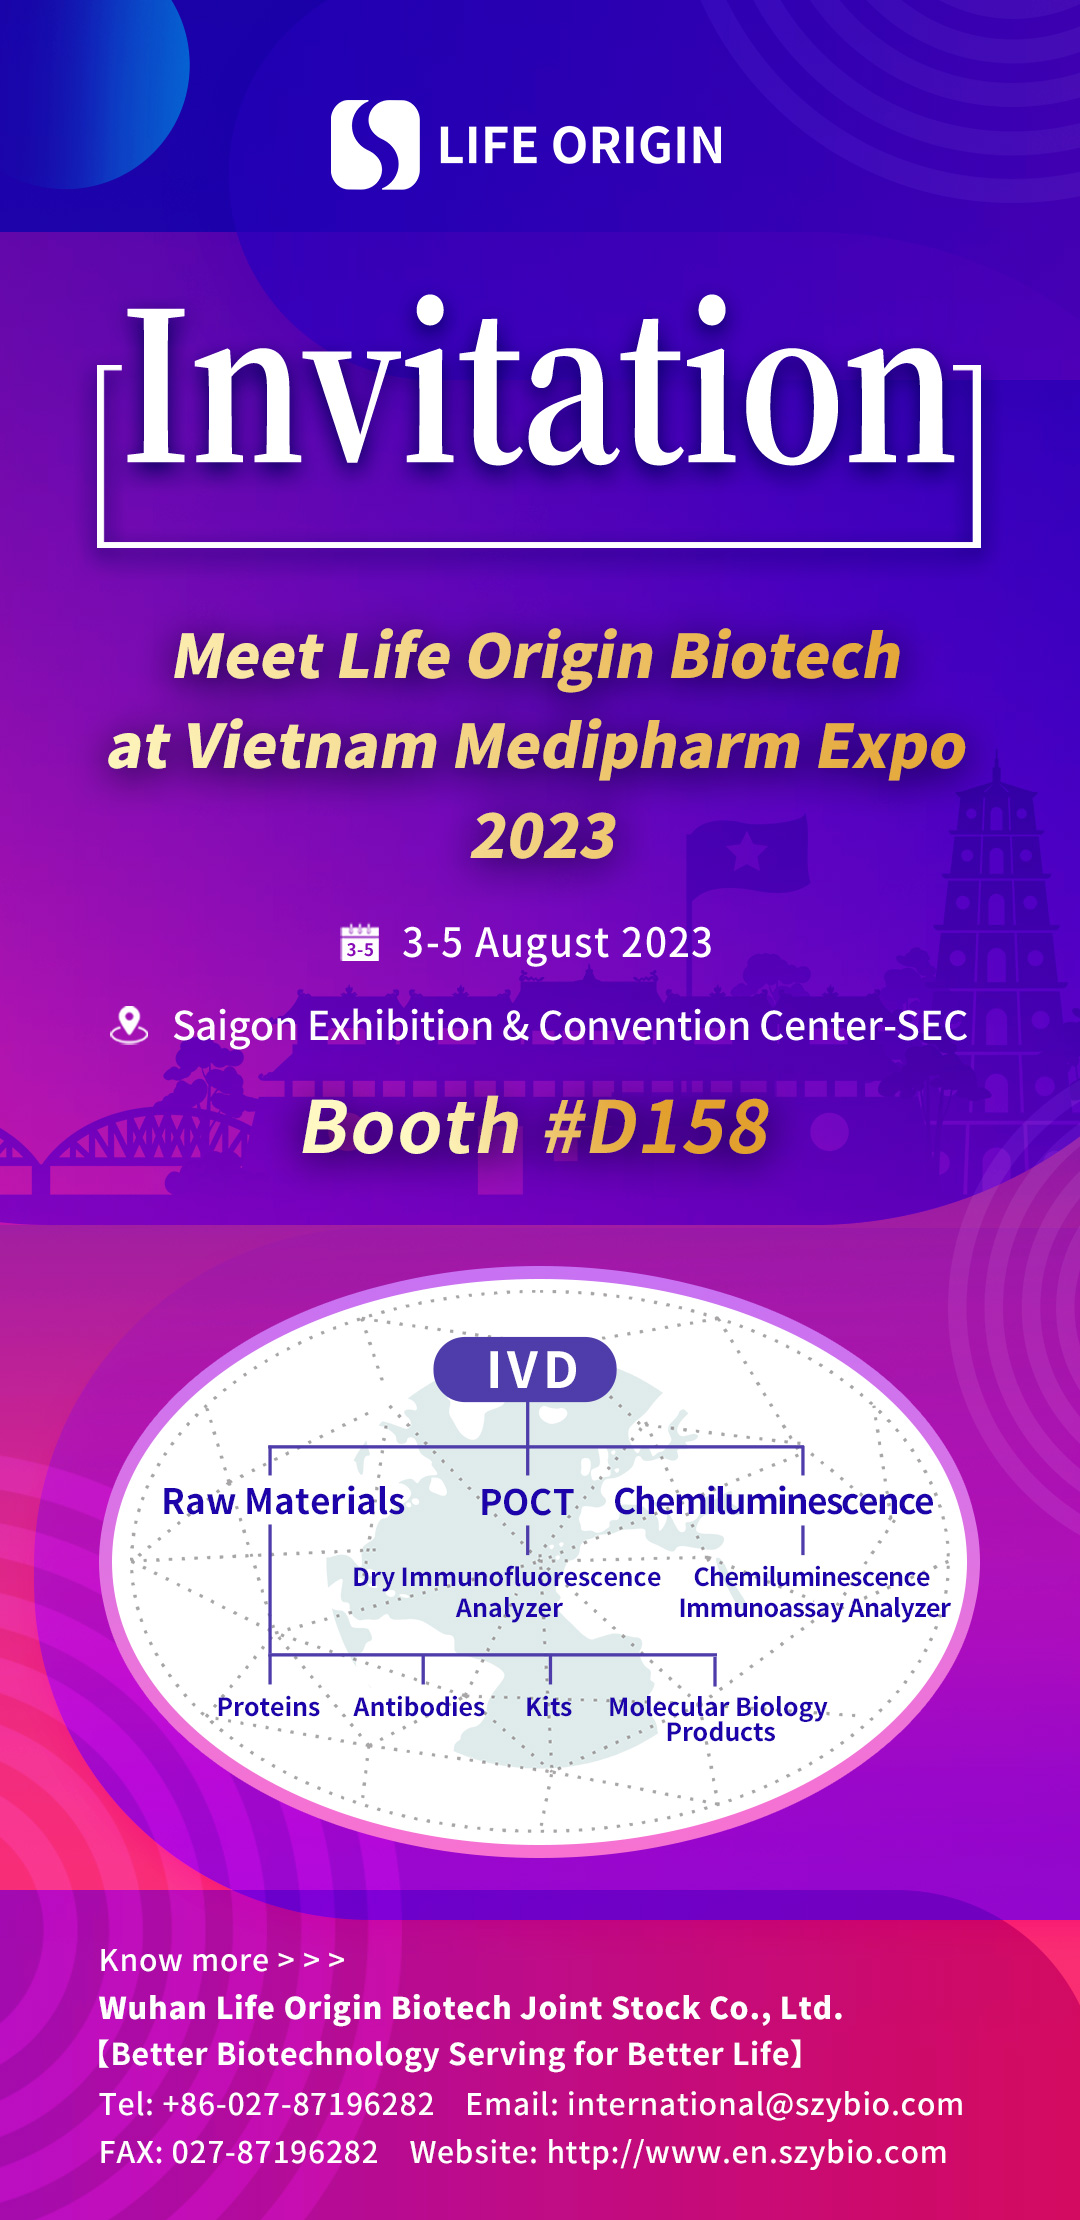 Exhibition Report｜Life Origin Biotech Appeared in the 21st VIETNAM (Ho Chi Minh) MEDI-PHARM EXPO